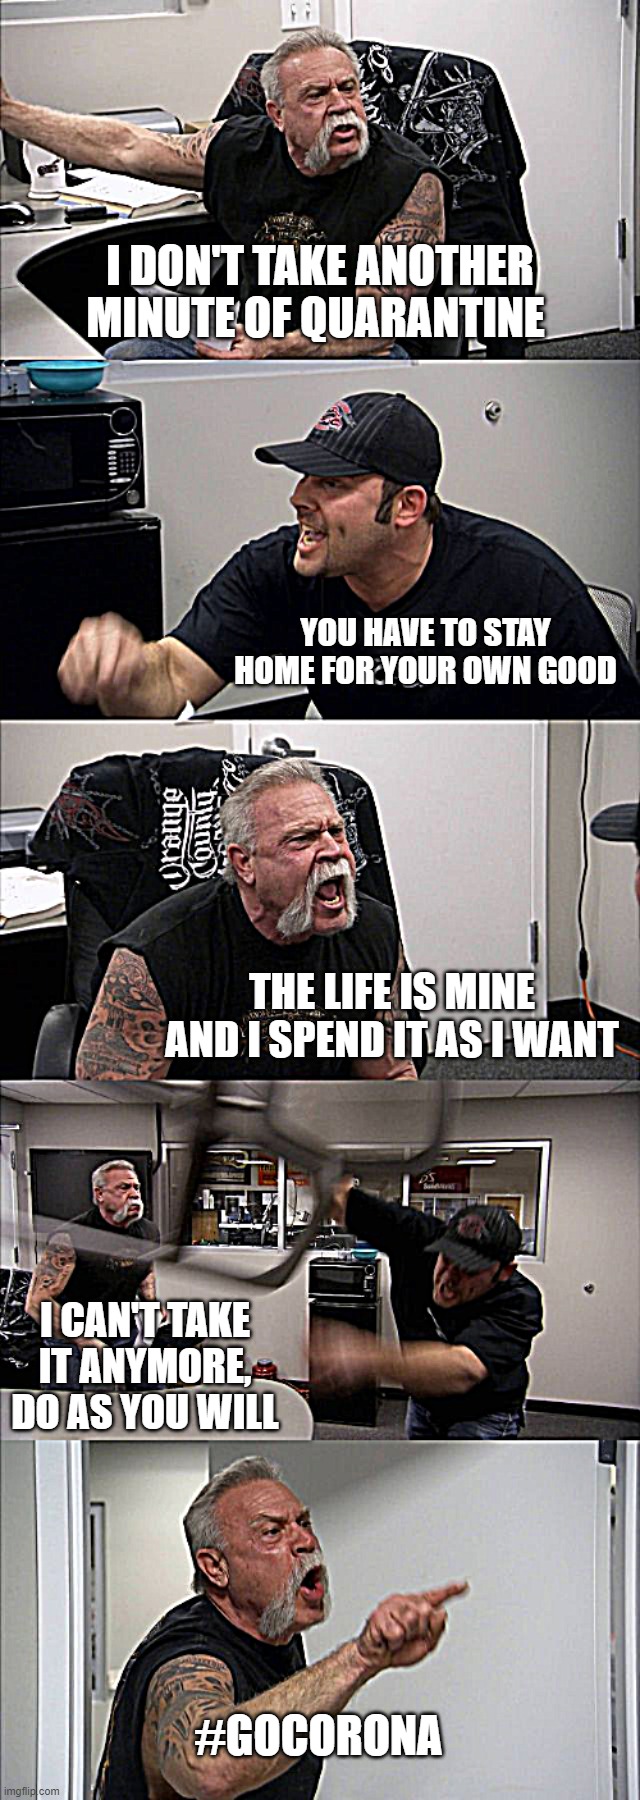 American Chopper Argument | I DON'T TAKE ANOTHER MINUTE OF QUARANTINE; YOU HAVE TO STAY HOME FOR YOUR OWN GOOD; THE LIFE IS MINE AND I SPEND IT AS I WANT; I CAN'T TAKE IT ANYMORE, DO AS YOU WILL; #GOCORONA | image tagged in memes,american chopper argument | made w/ Imgflip meme maker